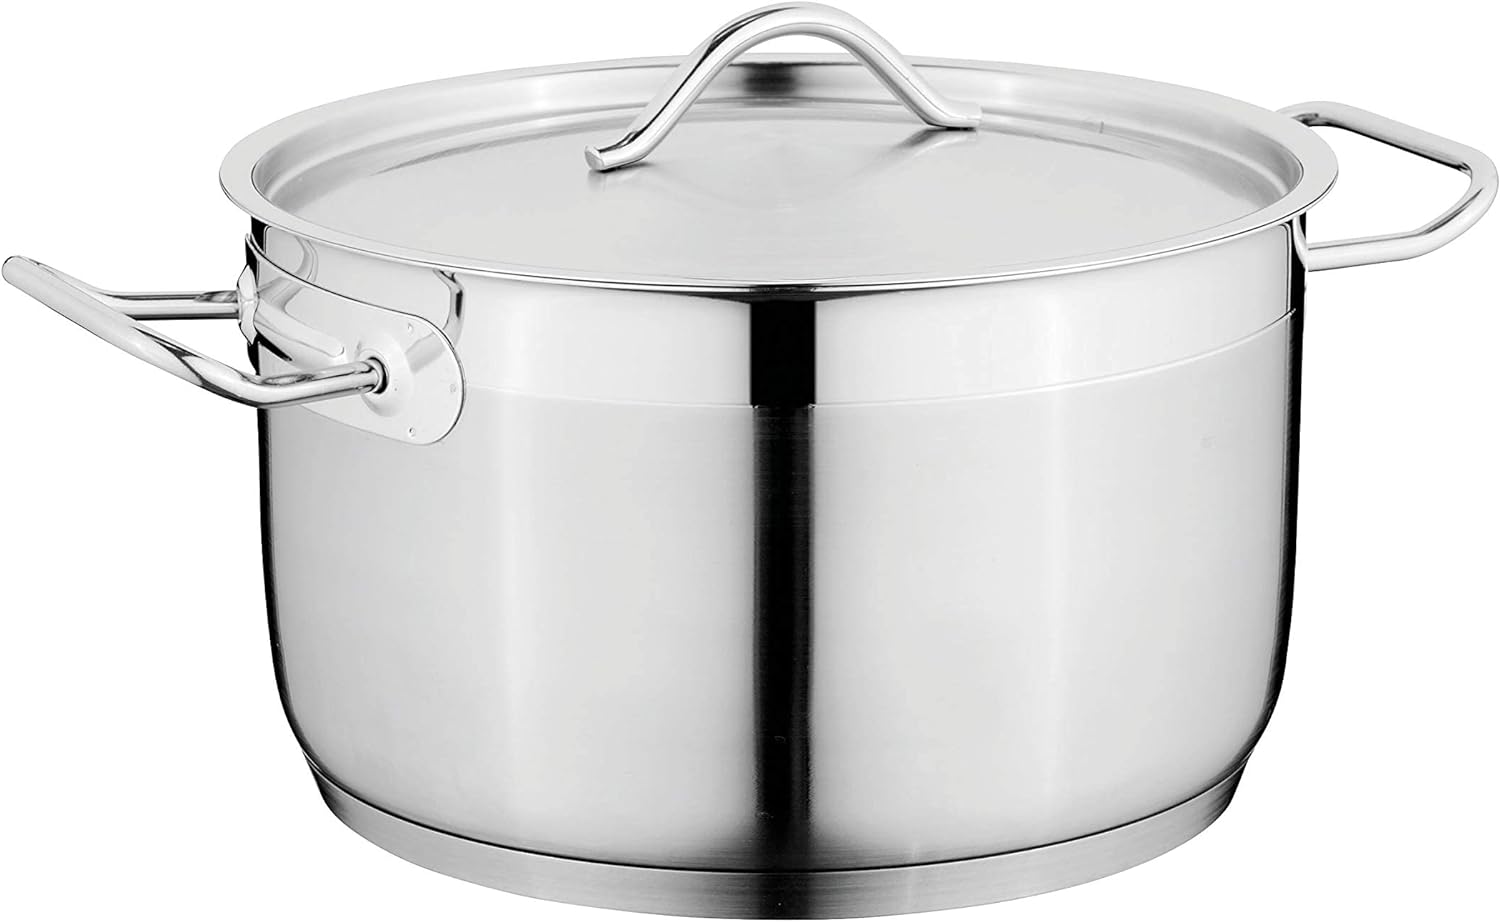 Is BergHOFF Cookware Non Toxic?